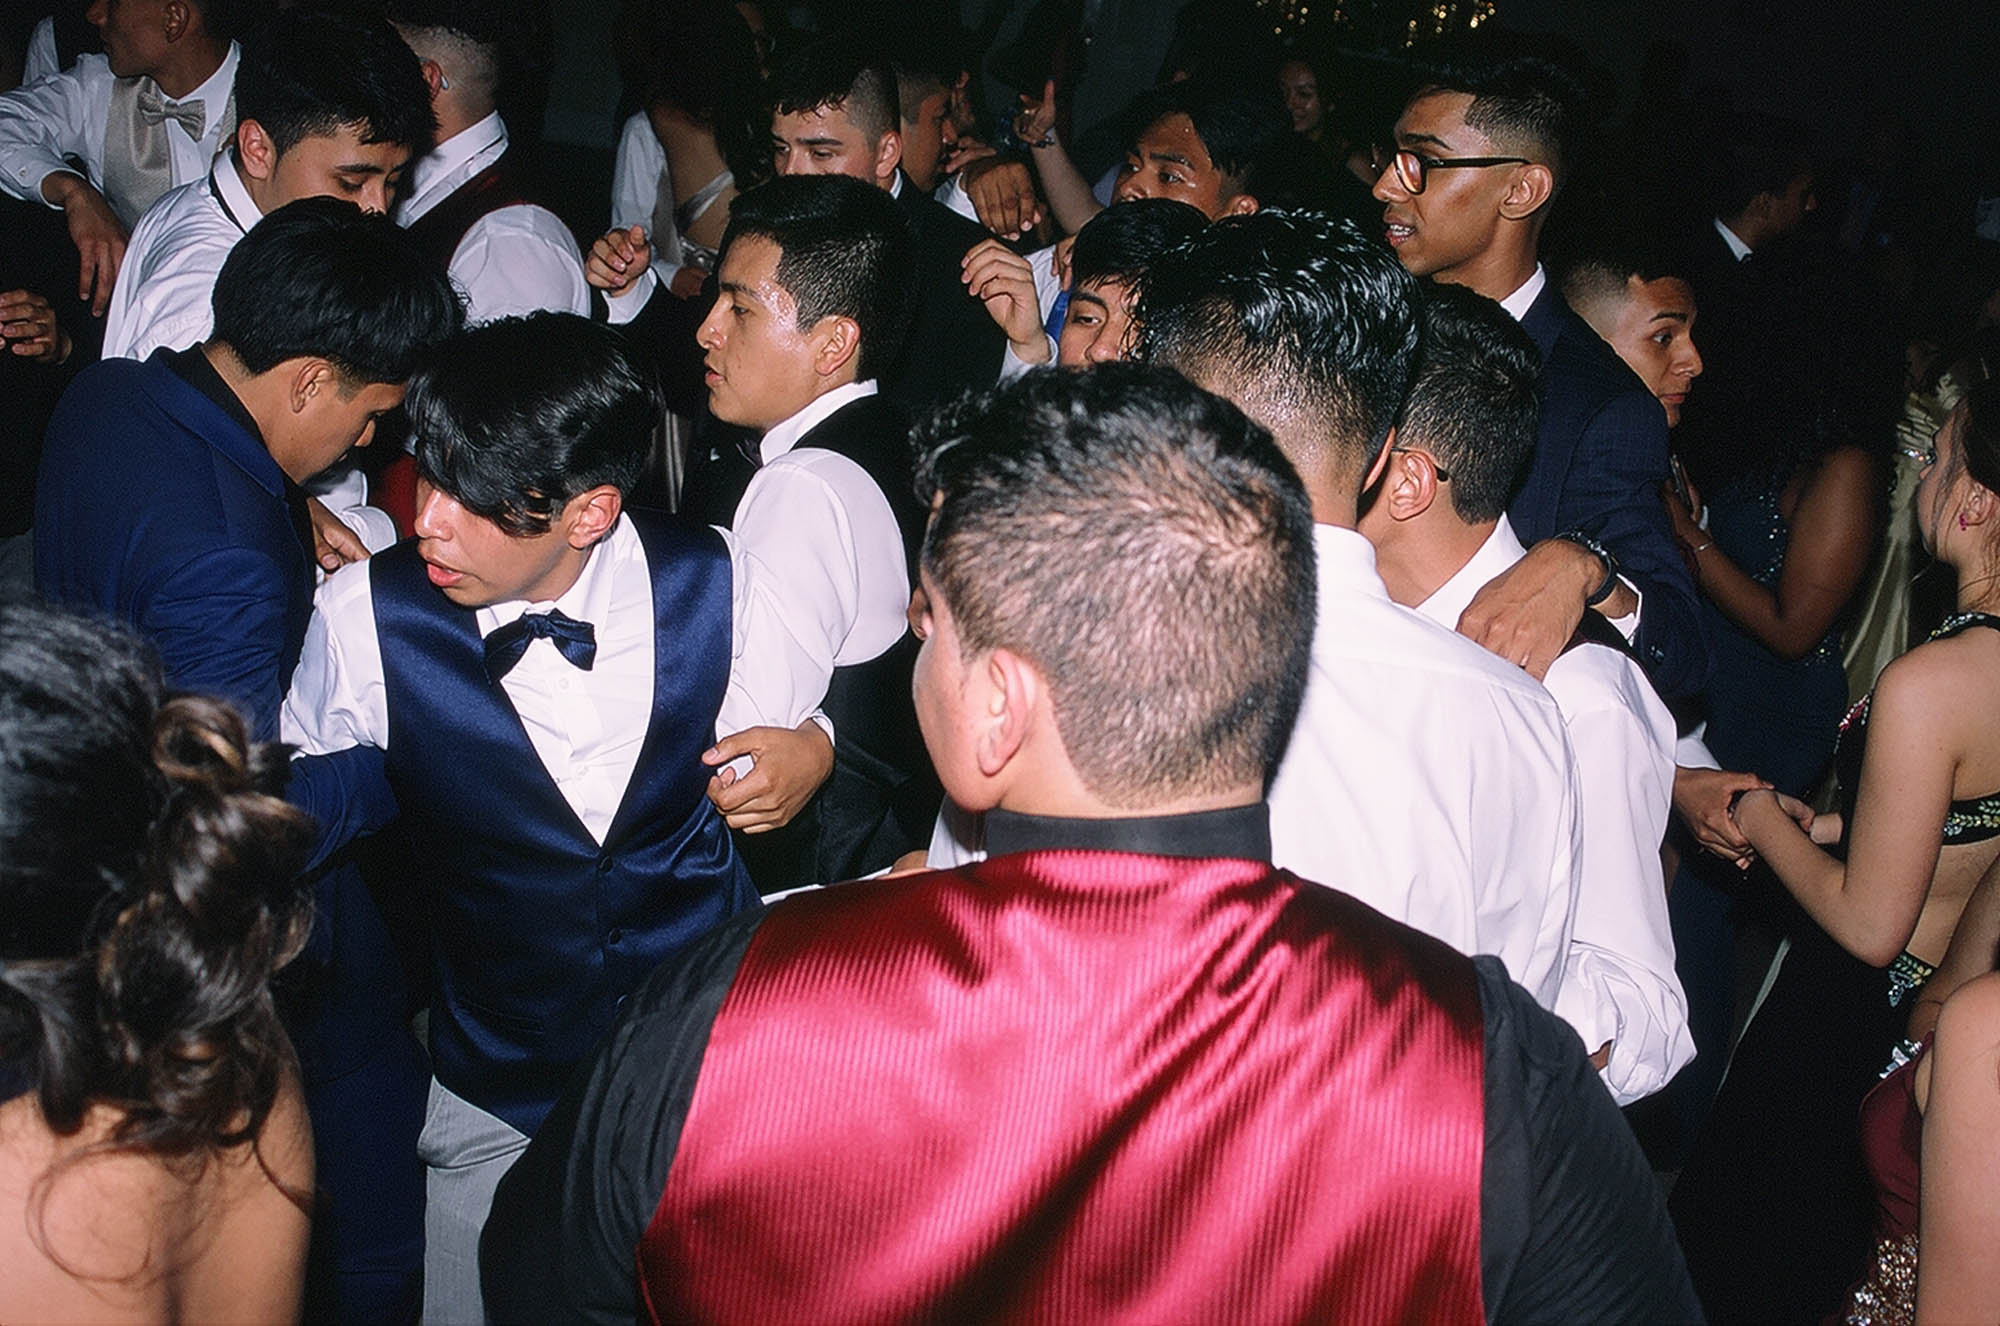 My senior prom pictures while people dancing Date: May 31, 2019 Shot on Fujifilm Fujichrome Provia 100f